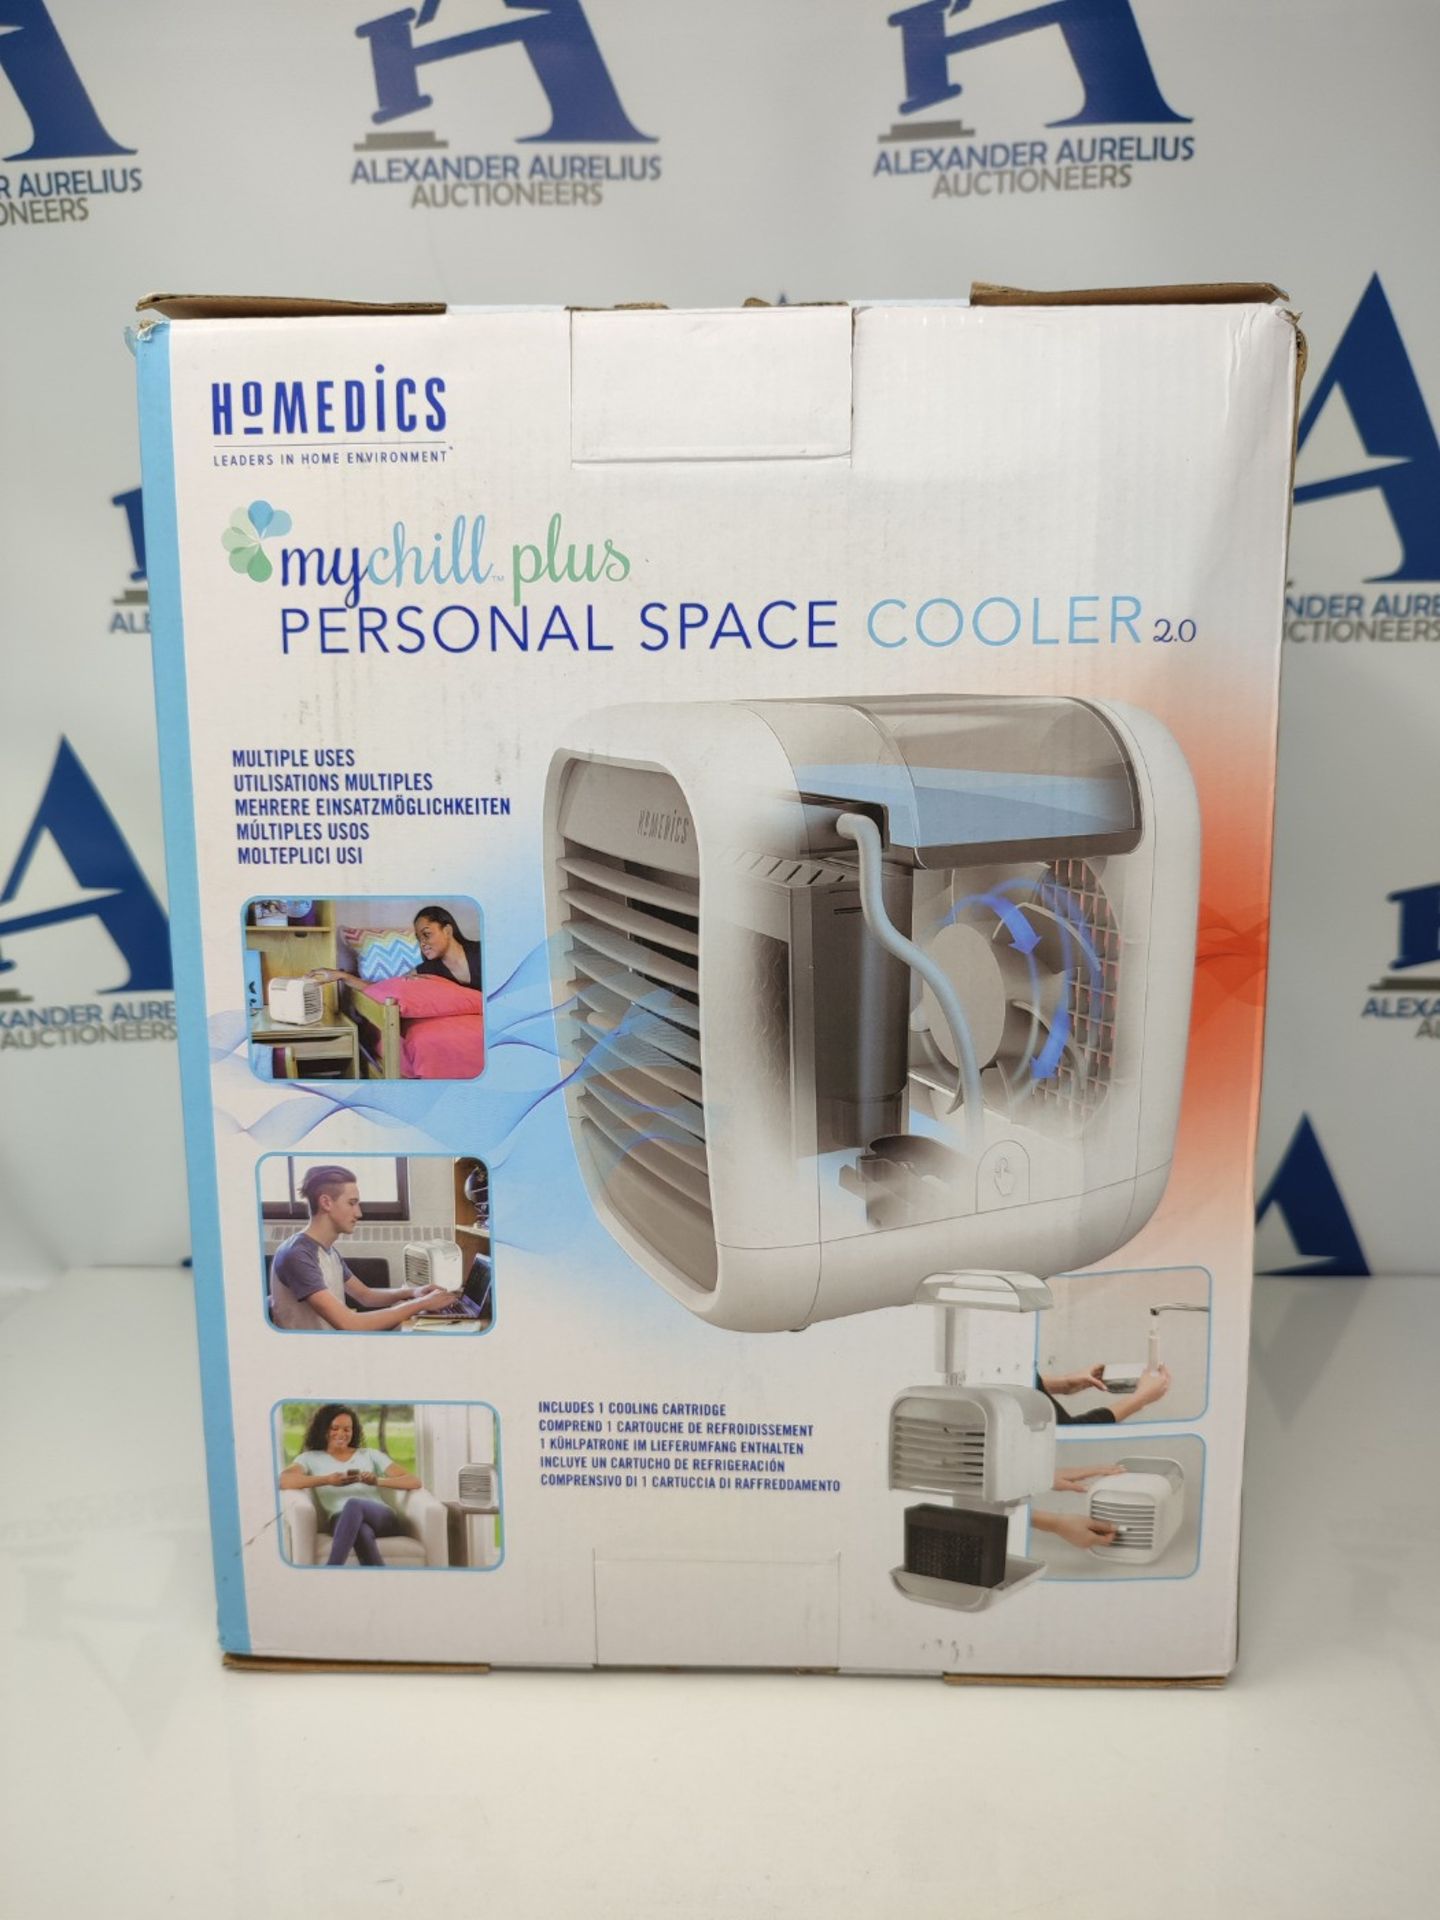 HoMedics PAC-35WT-EU2 Personal Space Cooler, MyChill Plus, 1.8 Metre Cooling Area, 3 S - Image 9 of 10